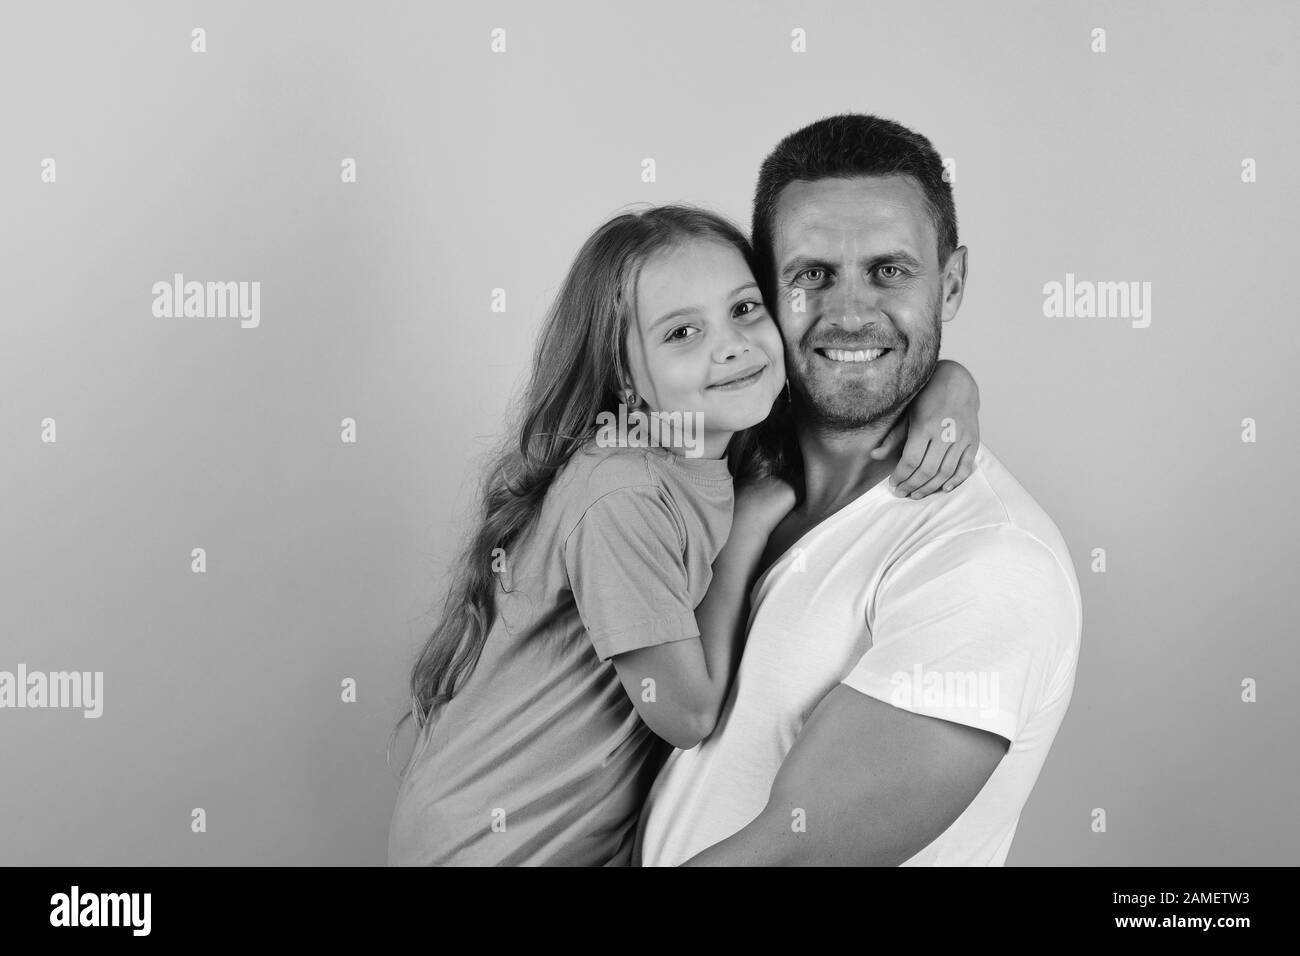 Daughter and father hug each other. Girl and man with happy faces isolated on blue background. Childhood and family concept. Schoolgirl and dads pose cheek to cheek, copy space. Stock Photo